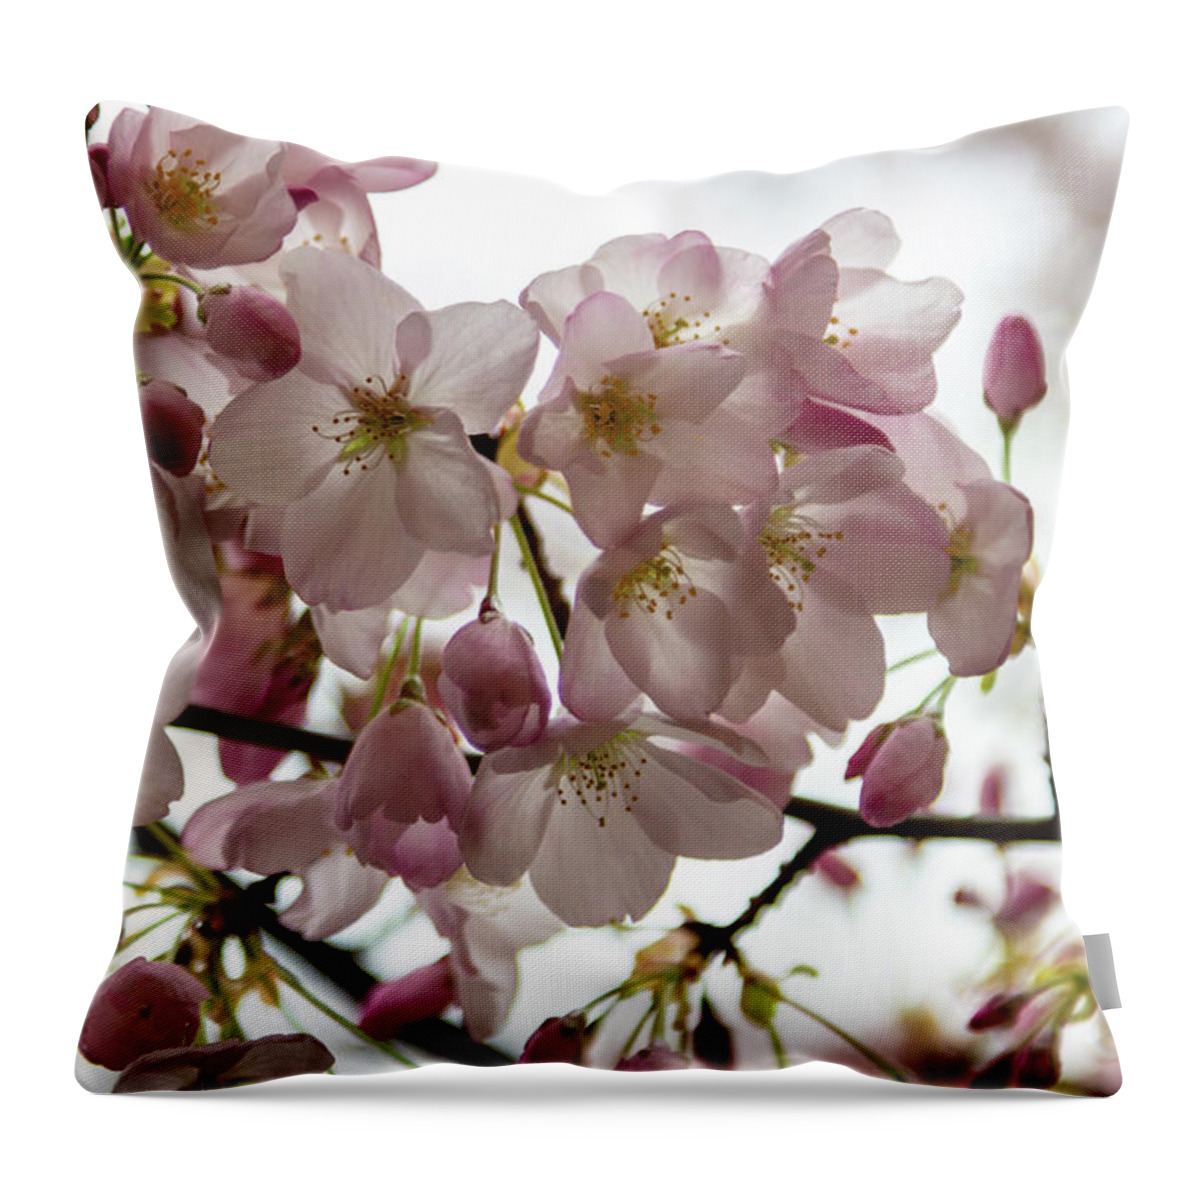 Cherry Blossoms Throw Pillow featuring the photograph Cherry Blossoms by Aashish Vaidya